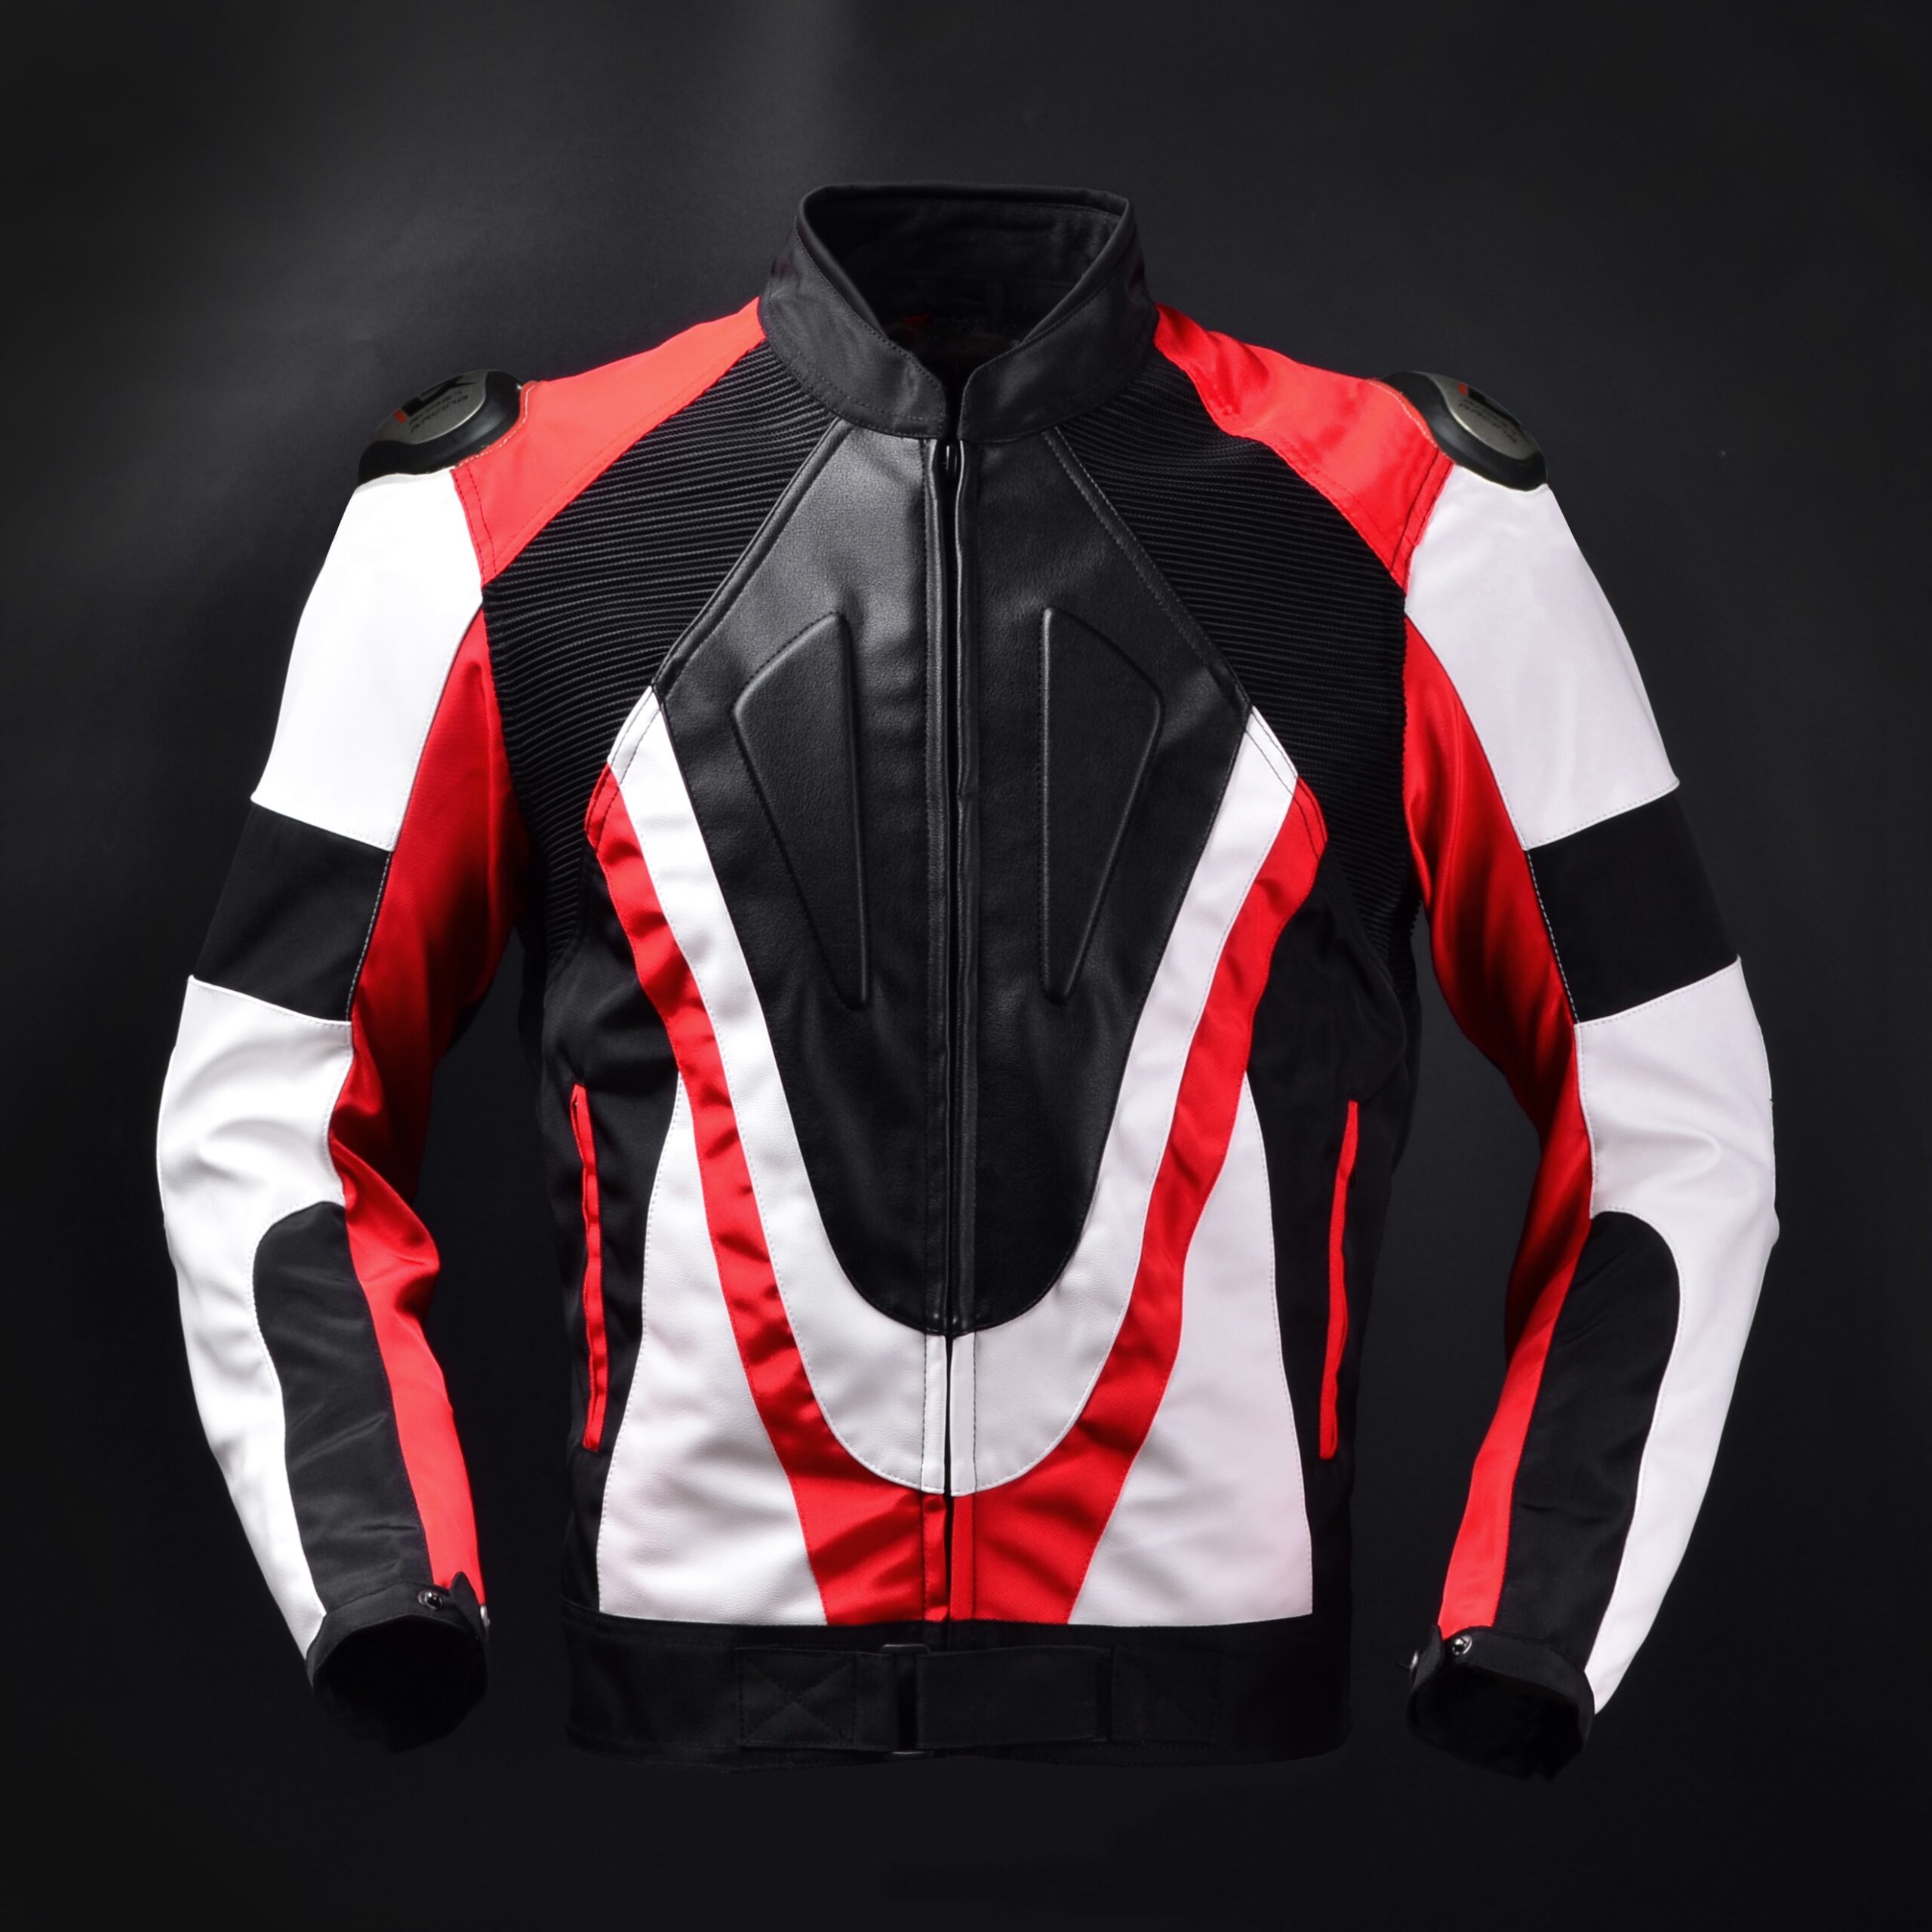 GHOST-RACING-motorcycle-riding-jacket-clothing-anti-fall-leather-sports-suit-motorcycle-jacket-4